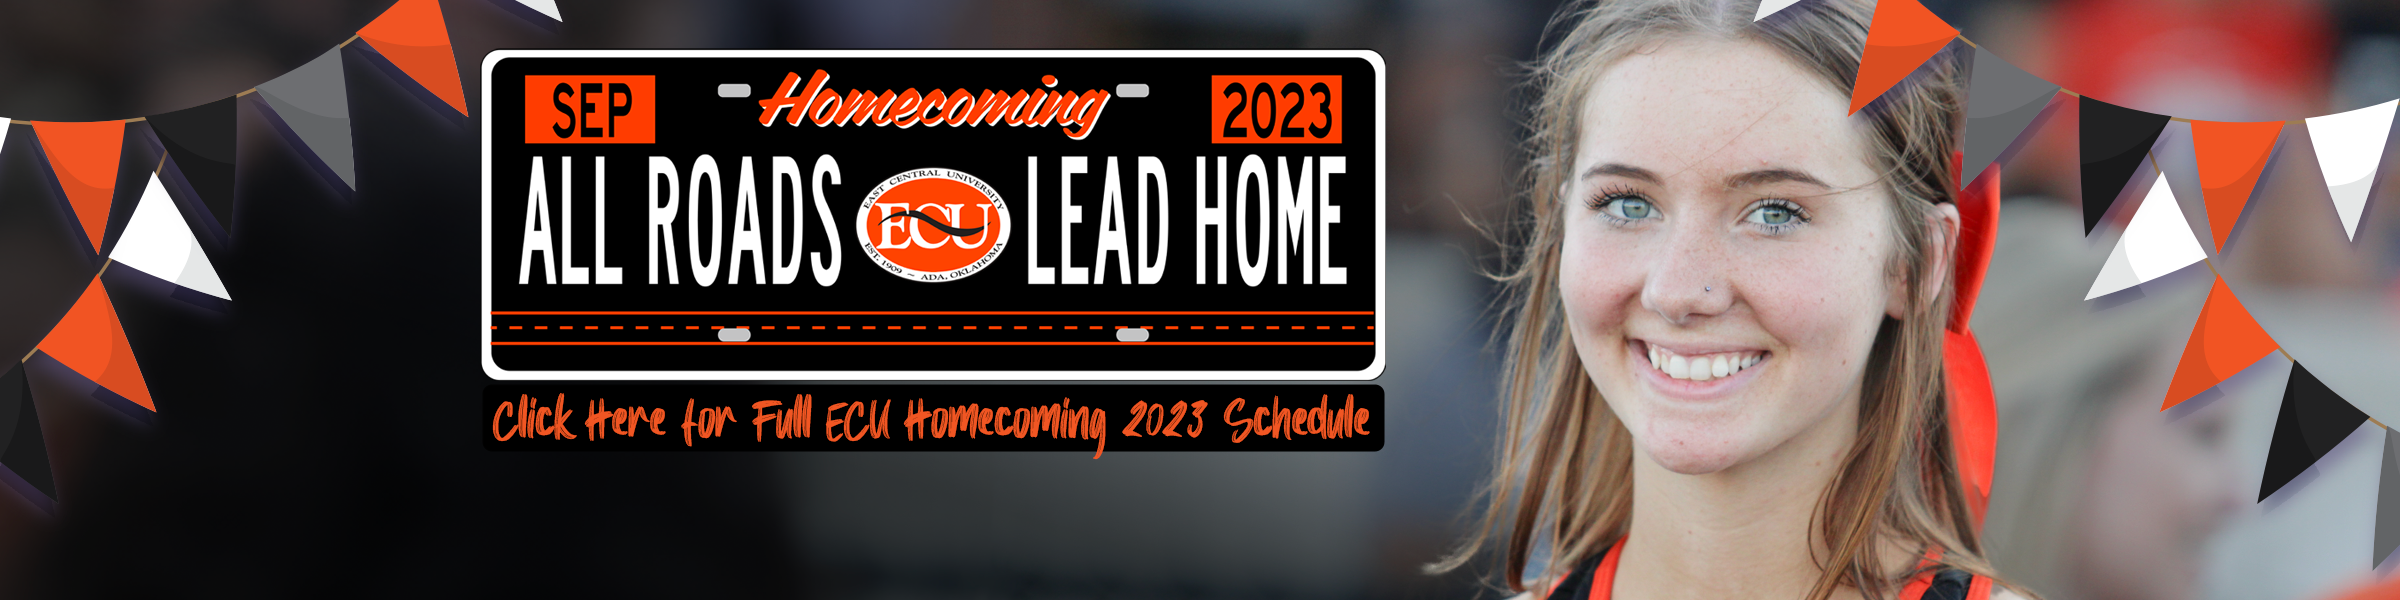 September 2023 - Homecoming  All Roads Lead Home  Click Here for Full ECU Homecoming 2023 Schedule